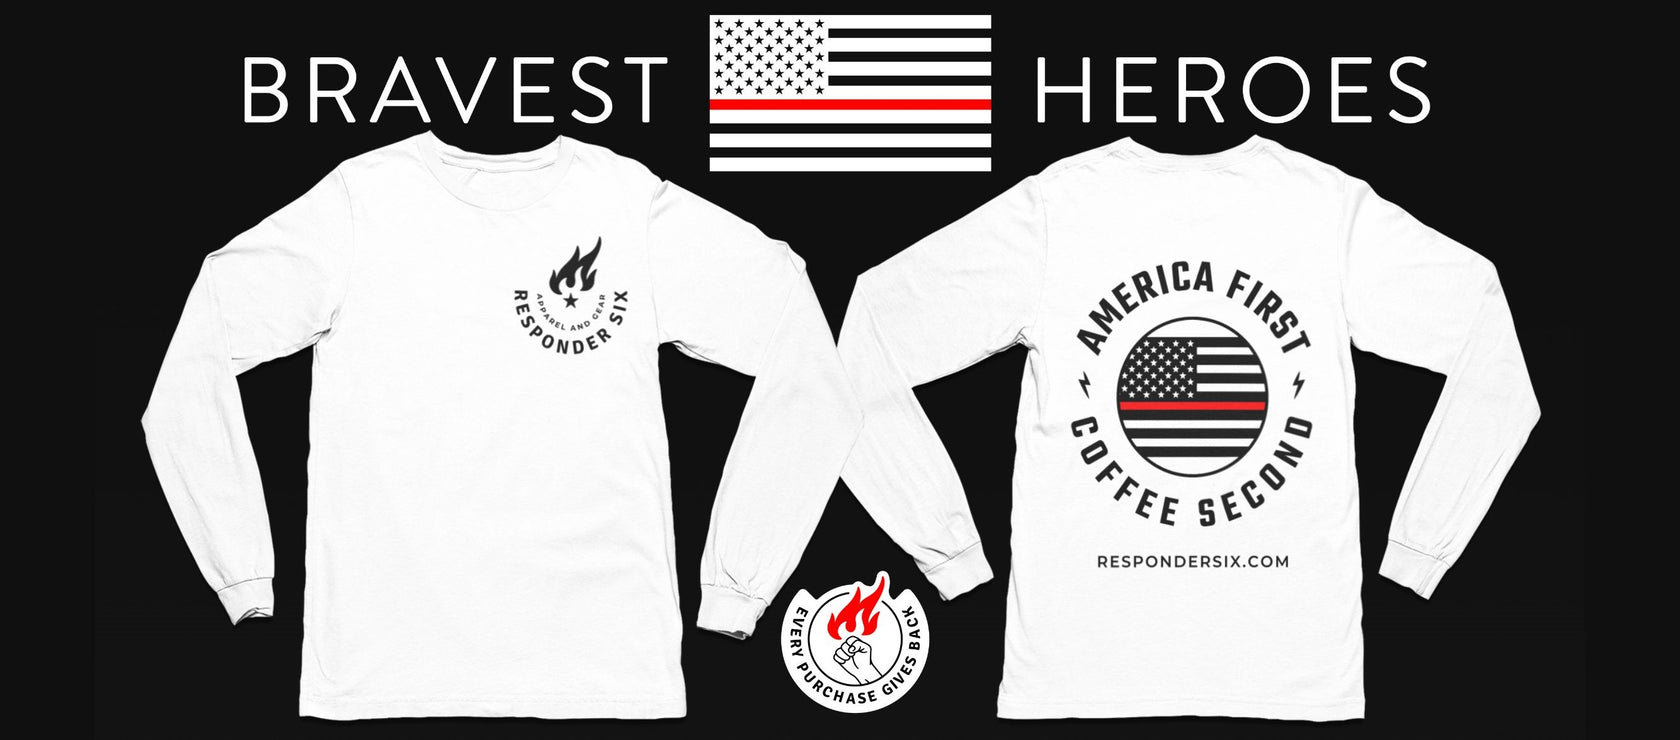 Thin Red Line Long Sleeve